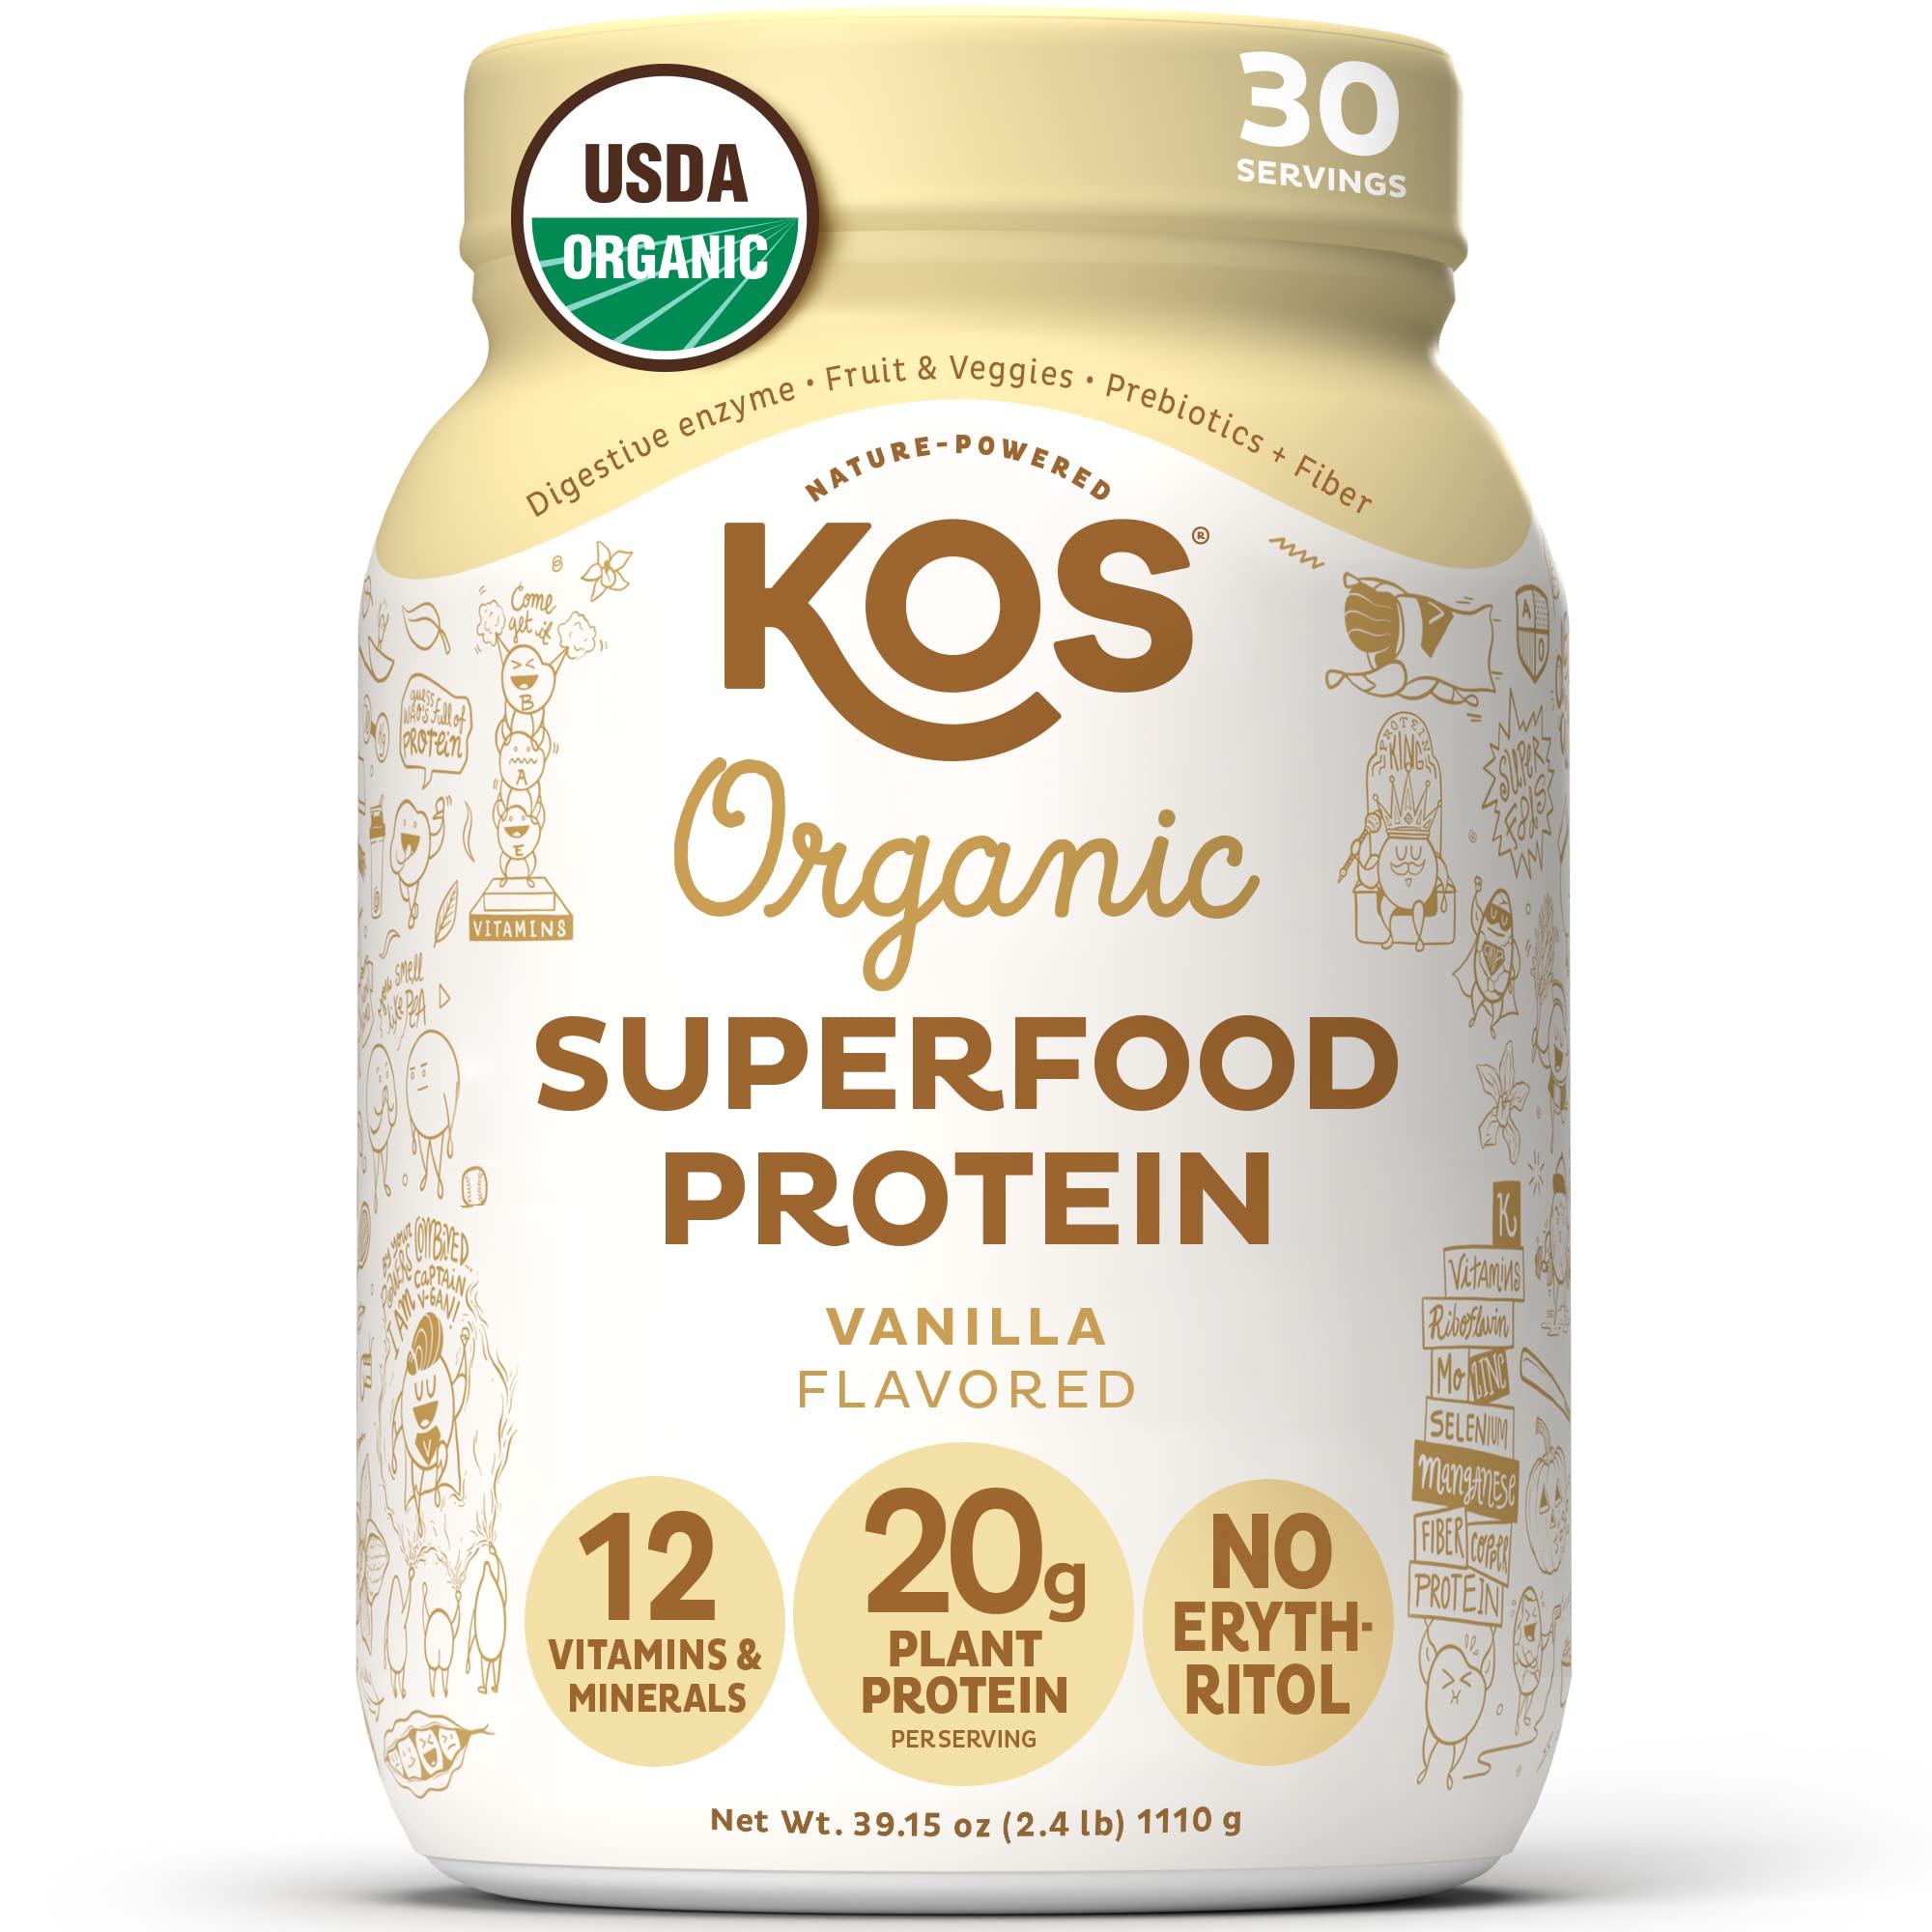 Book Cover KOS Vegan Protein Powder Erythritol Free, Vanilla USDA Organic - Pea Protein Blend, Plant Based Superfood Rich in Vitamins & Minerals - Keto, Dairy Free - Meal Replacement for Women & Men, 30 Servings Vanilla 30 Servings